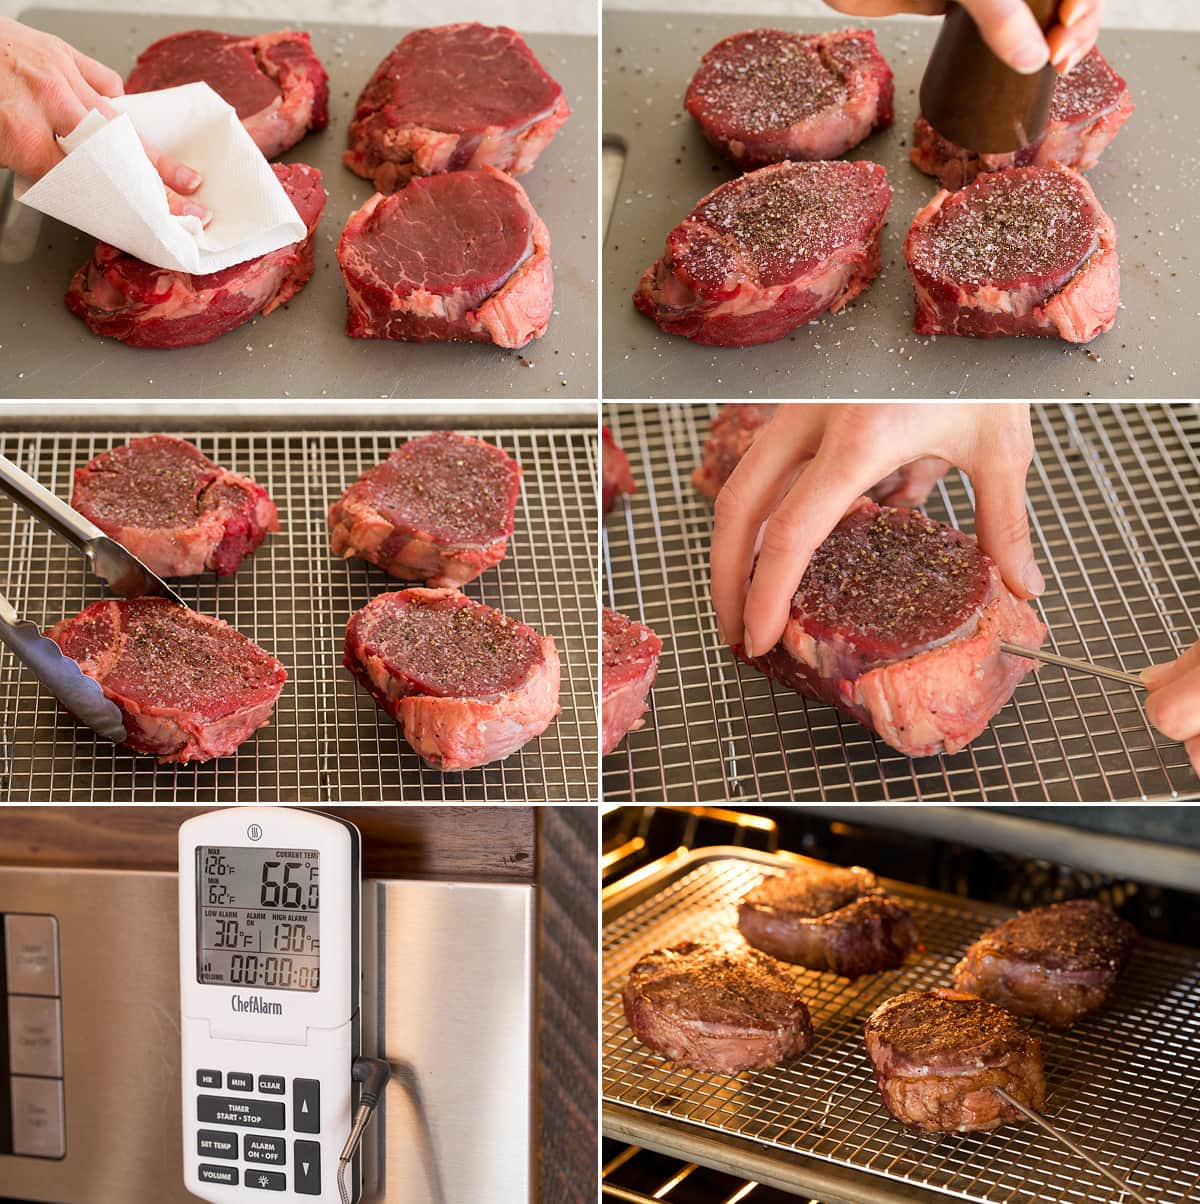 Photo of preparing filet mignon steaks for cooking in the oven on a wire rack on a baking sheet. Also shows an oven safe probe thermometer being used and steaks cooking in oven.